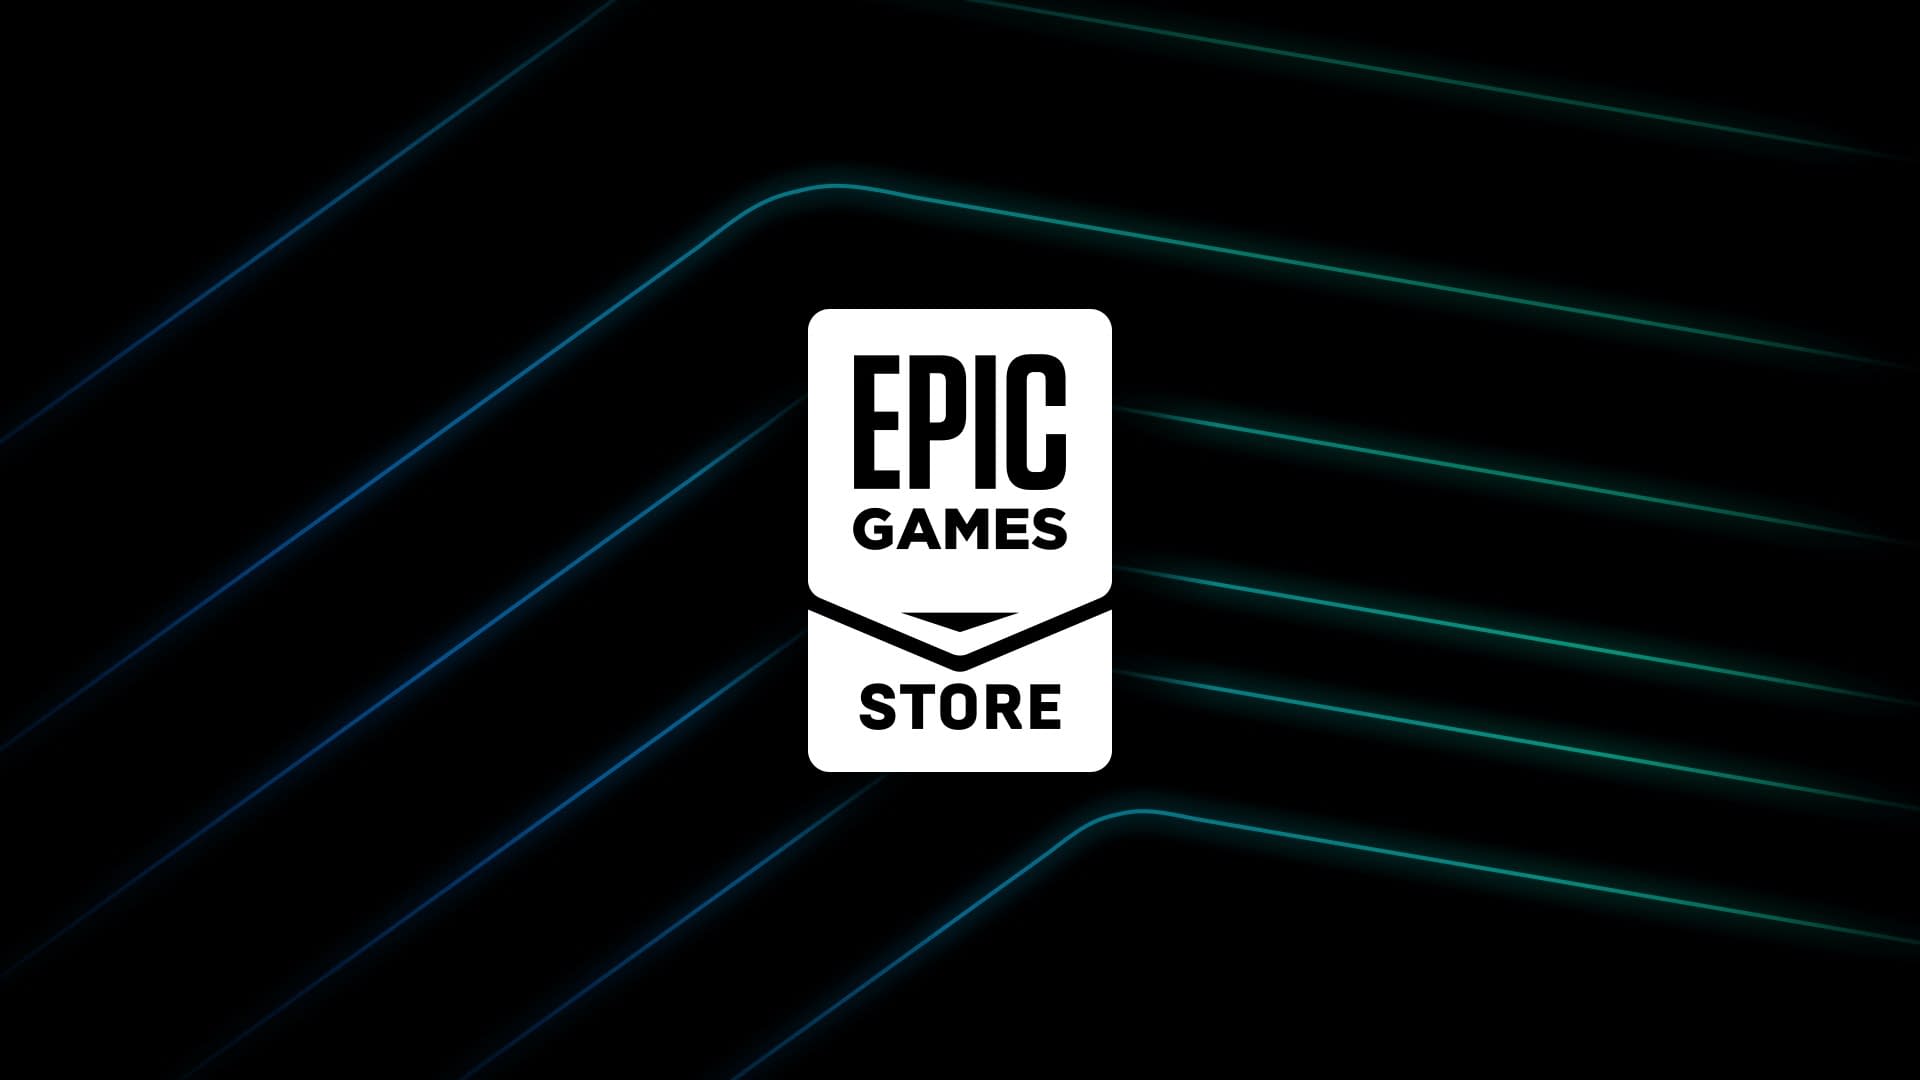 Remember to add 90 Tl’s Free Game to your library in Epic Games!